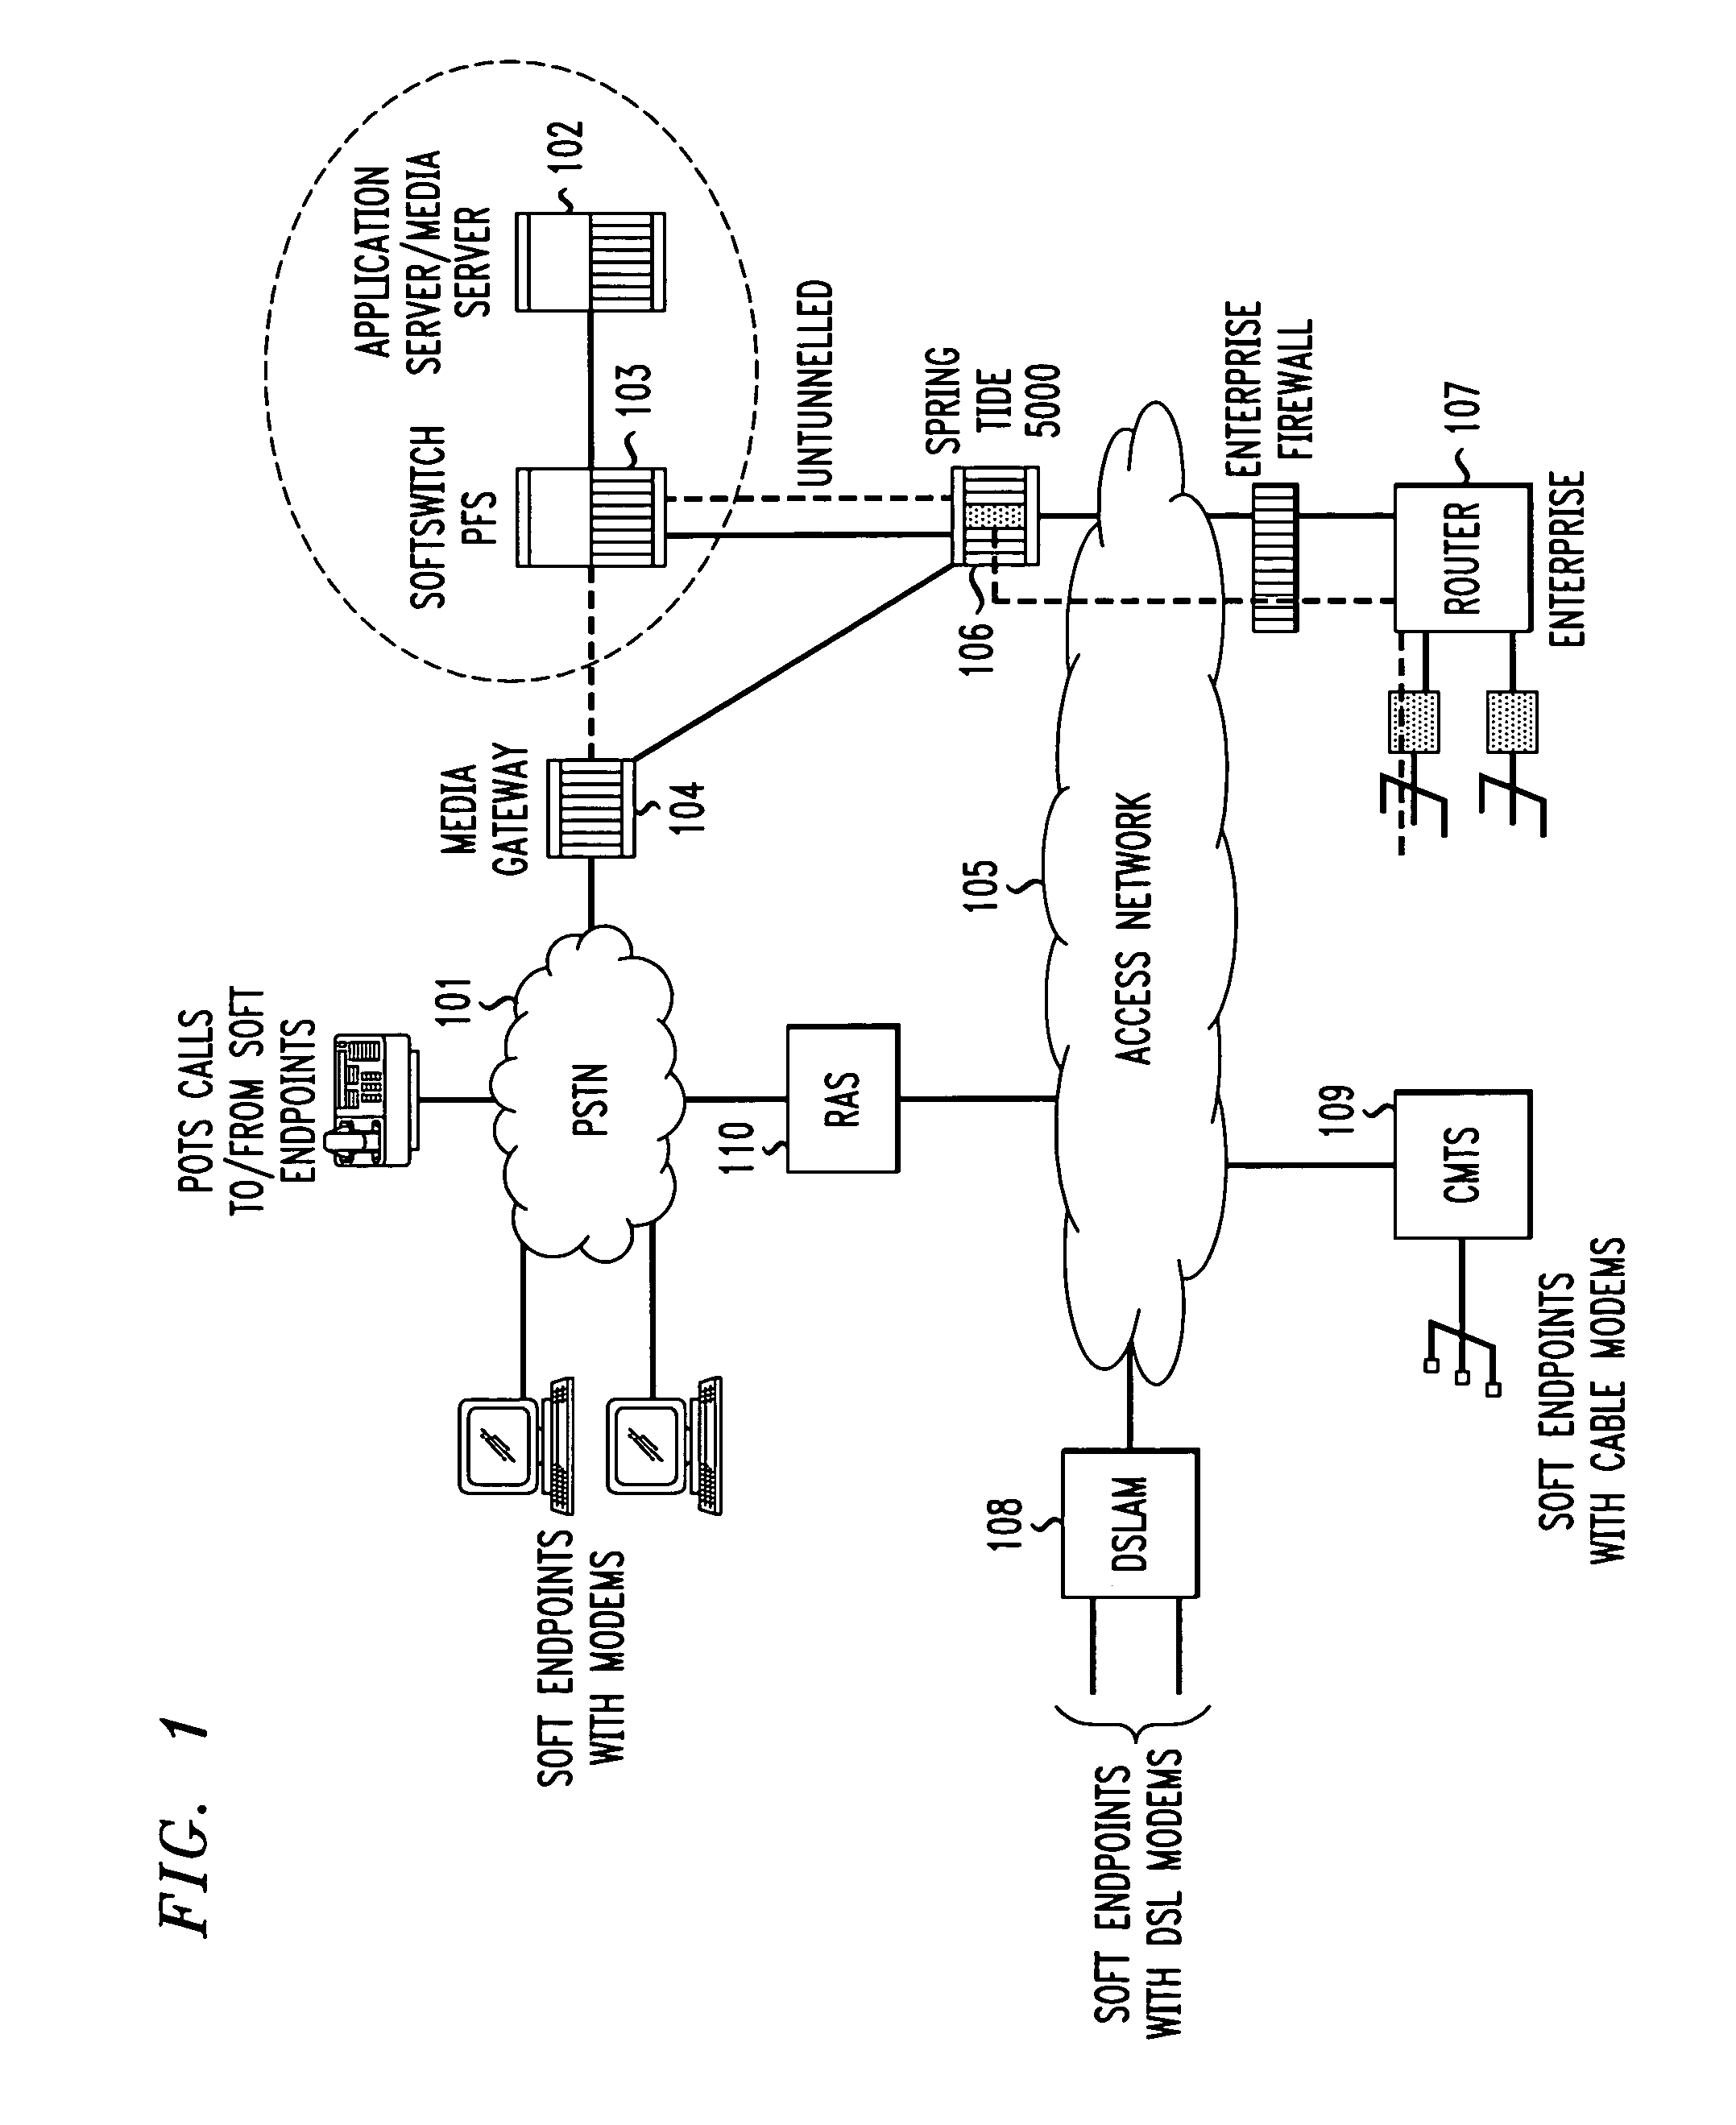 Apparatus and method for use in a data/conference call system for automatically collecting participant information and providing all participants with that information for use in collaboration services